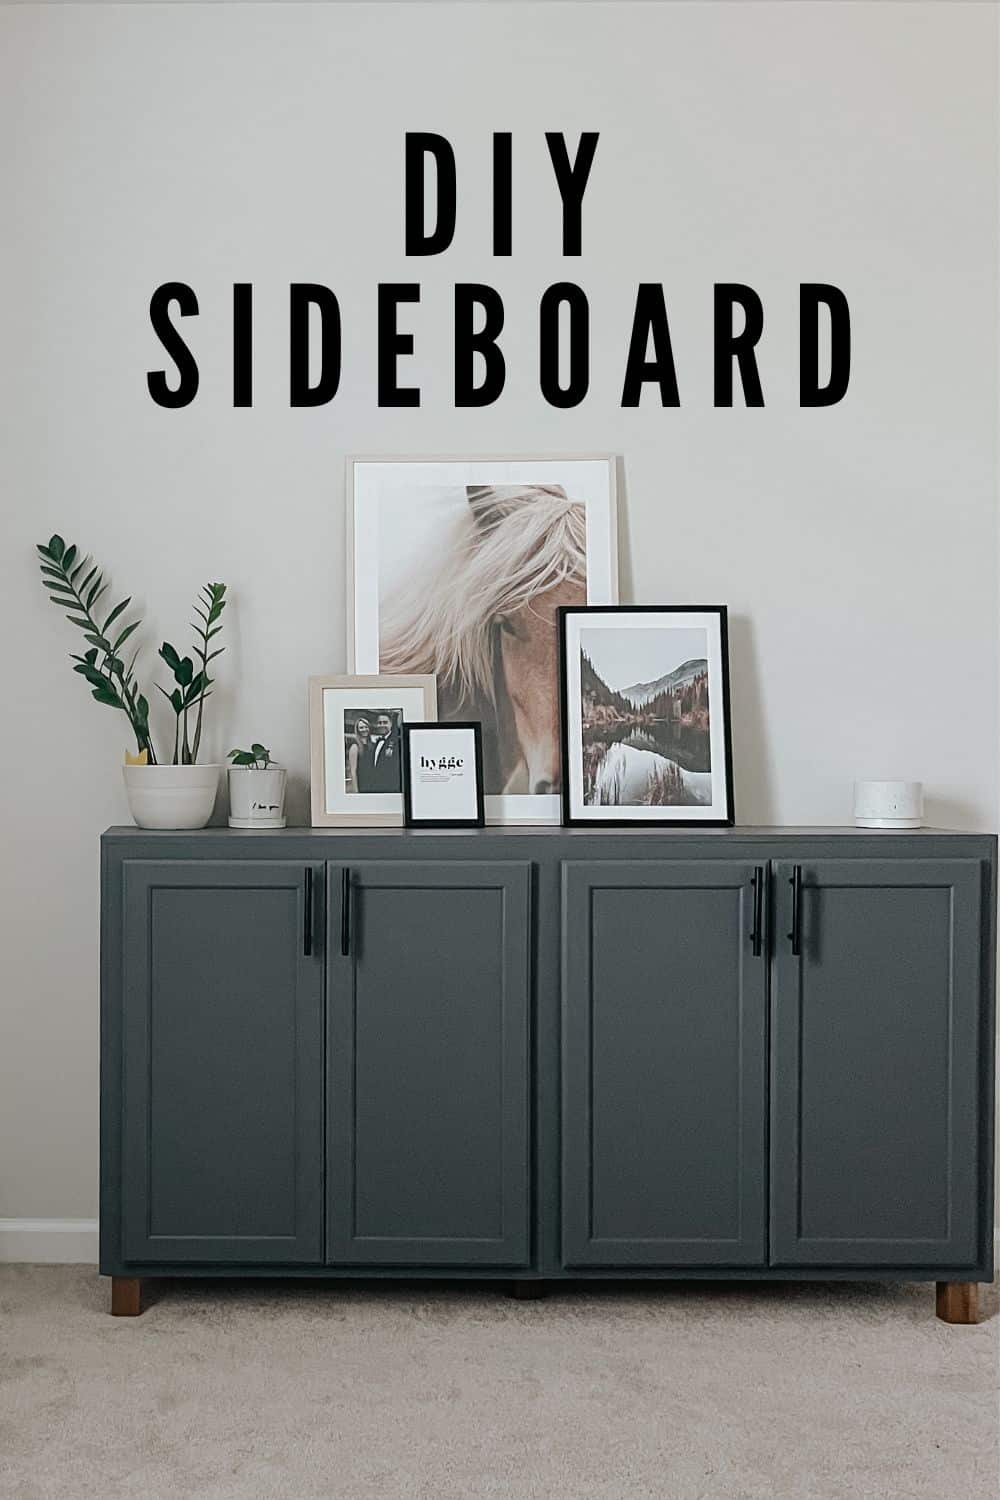 Easy DIY Sideboard Cabinet: How To Build From Stock Cabinets